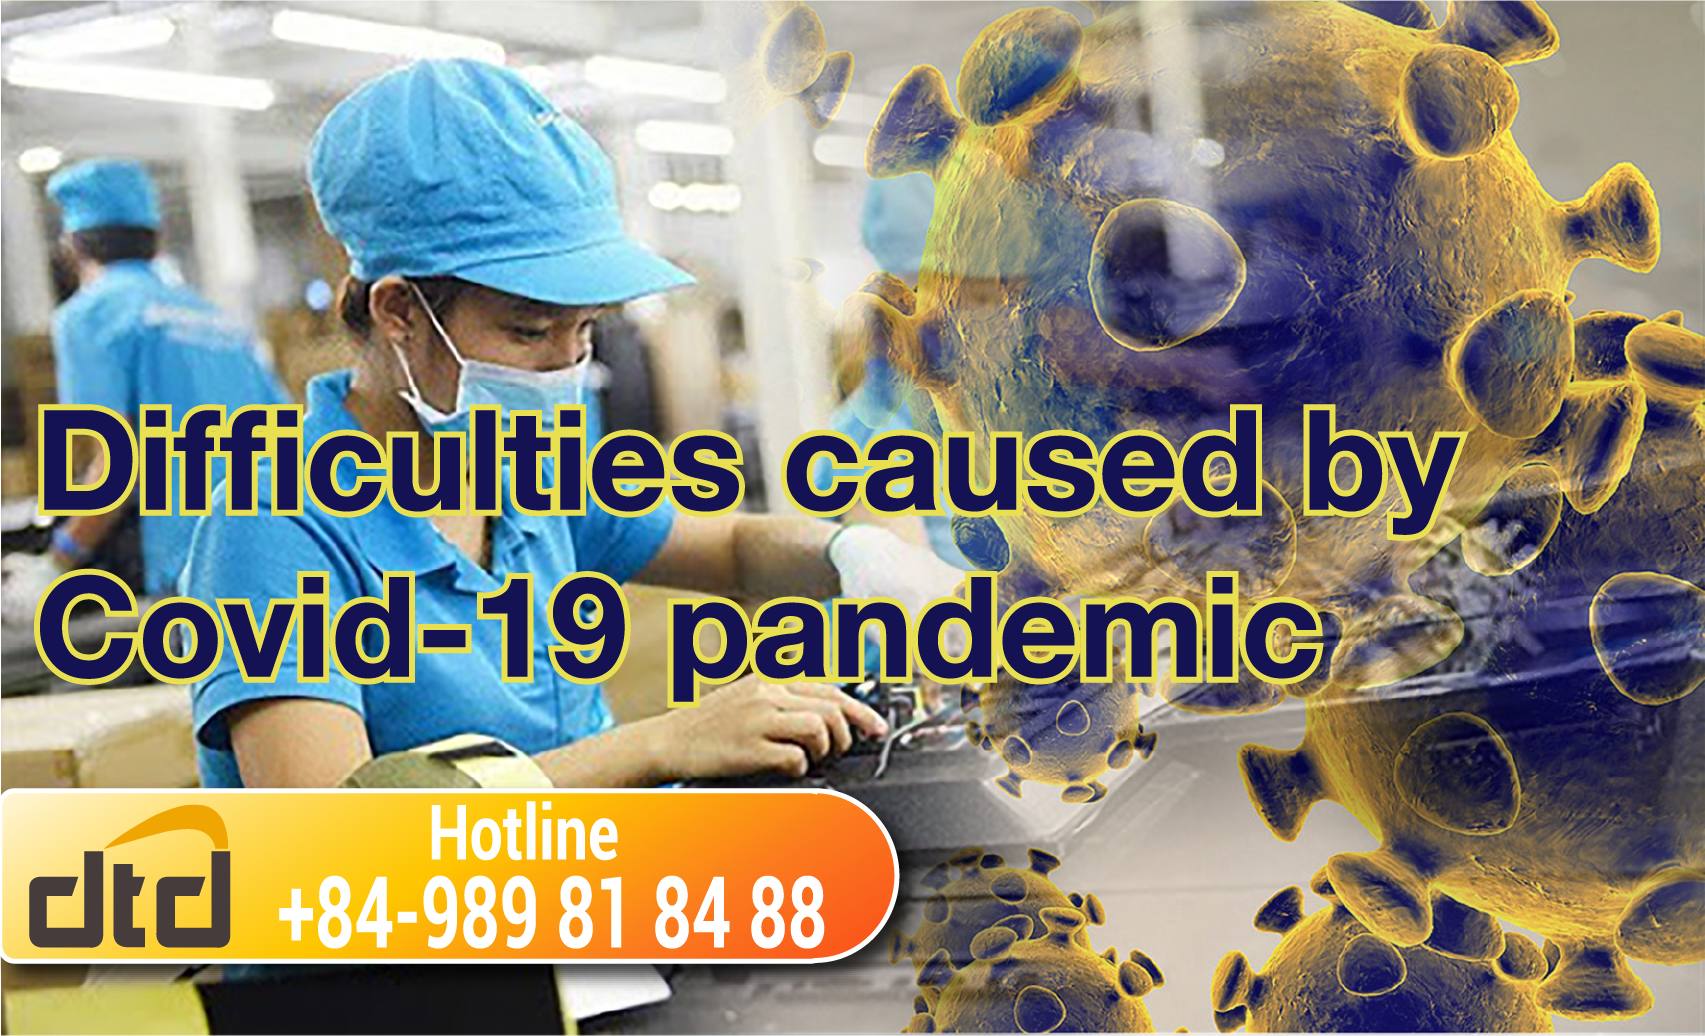 Difficulties caused by Covid-19 pandemic: Should enterprises be suspended or dissolved?